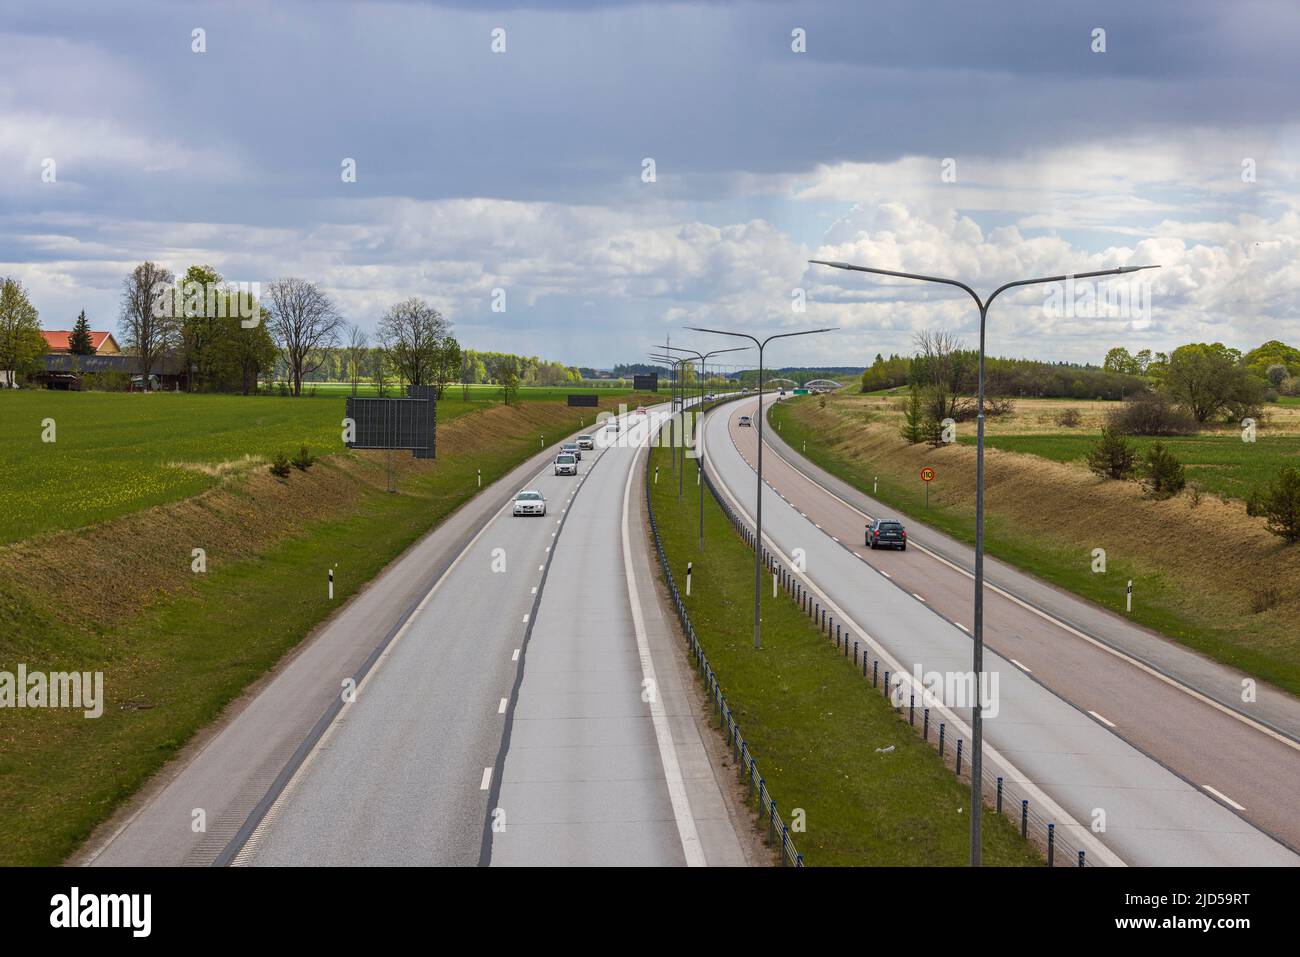 Beautiful top view of highway with several cars. Green side fields and sky with clouds background. Sweden. Stock Photo